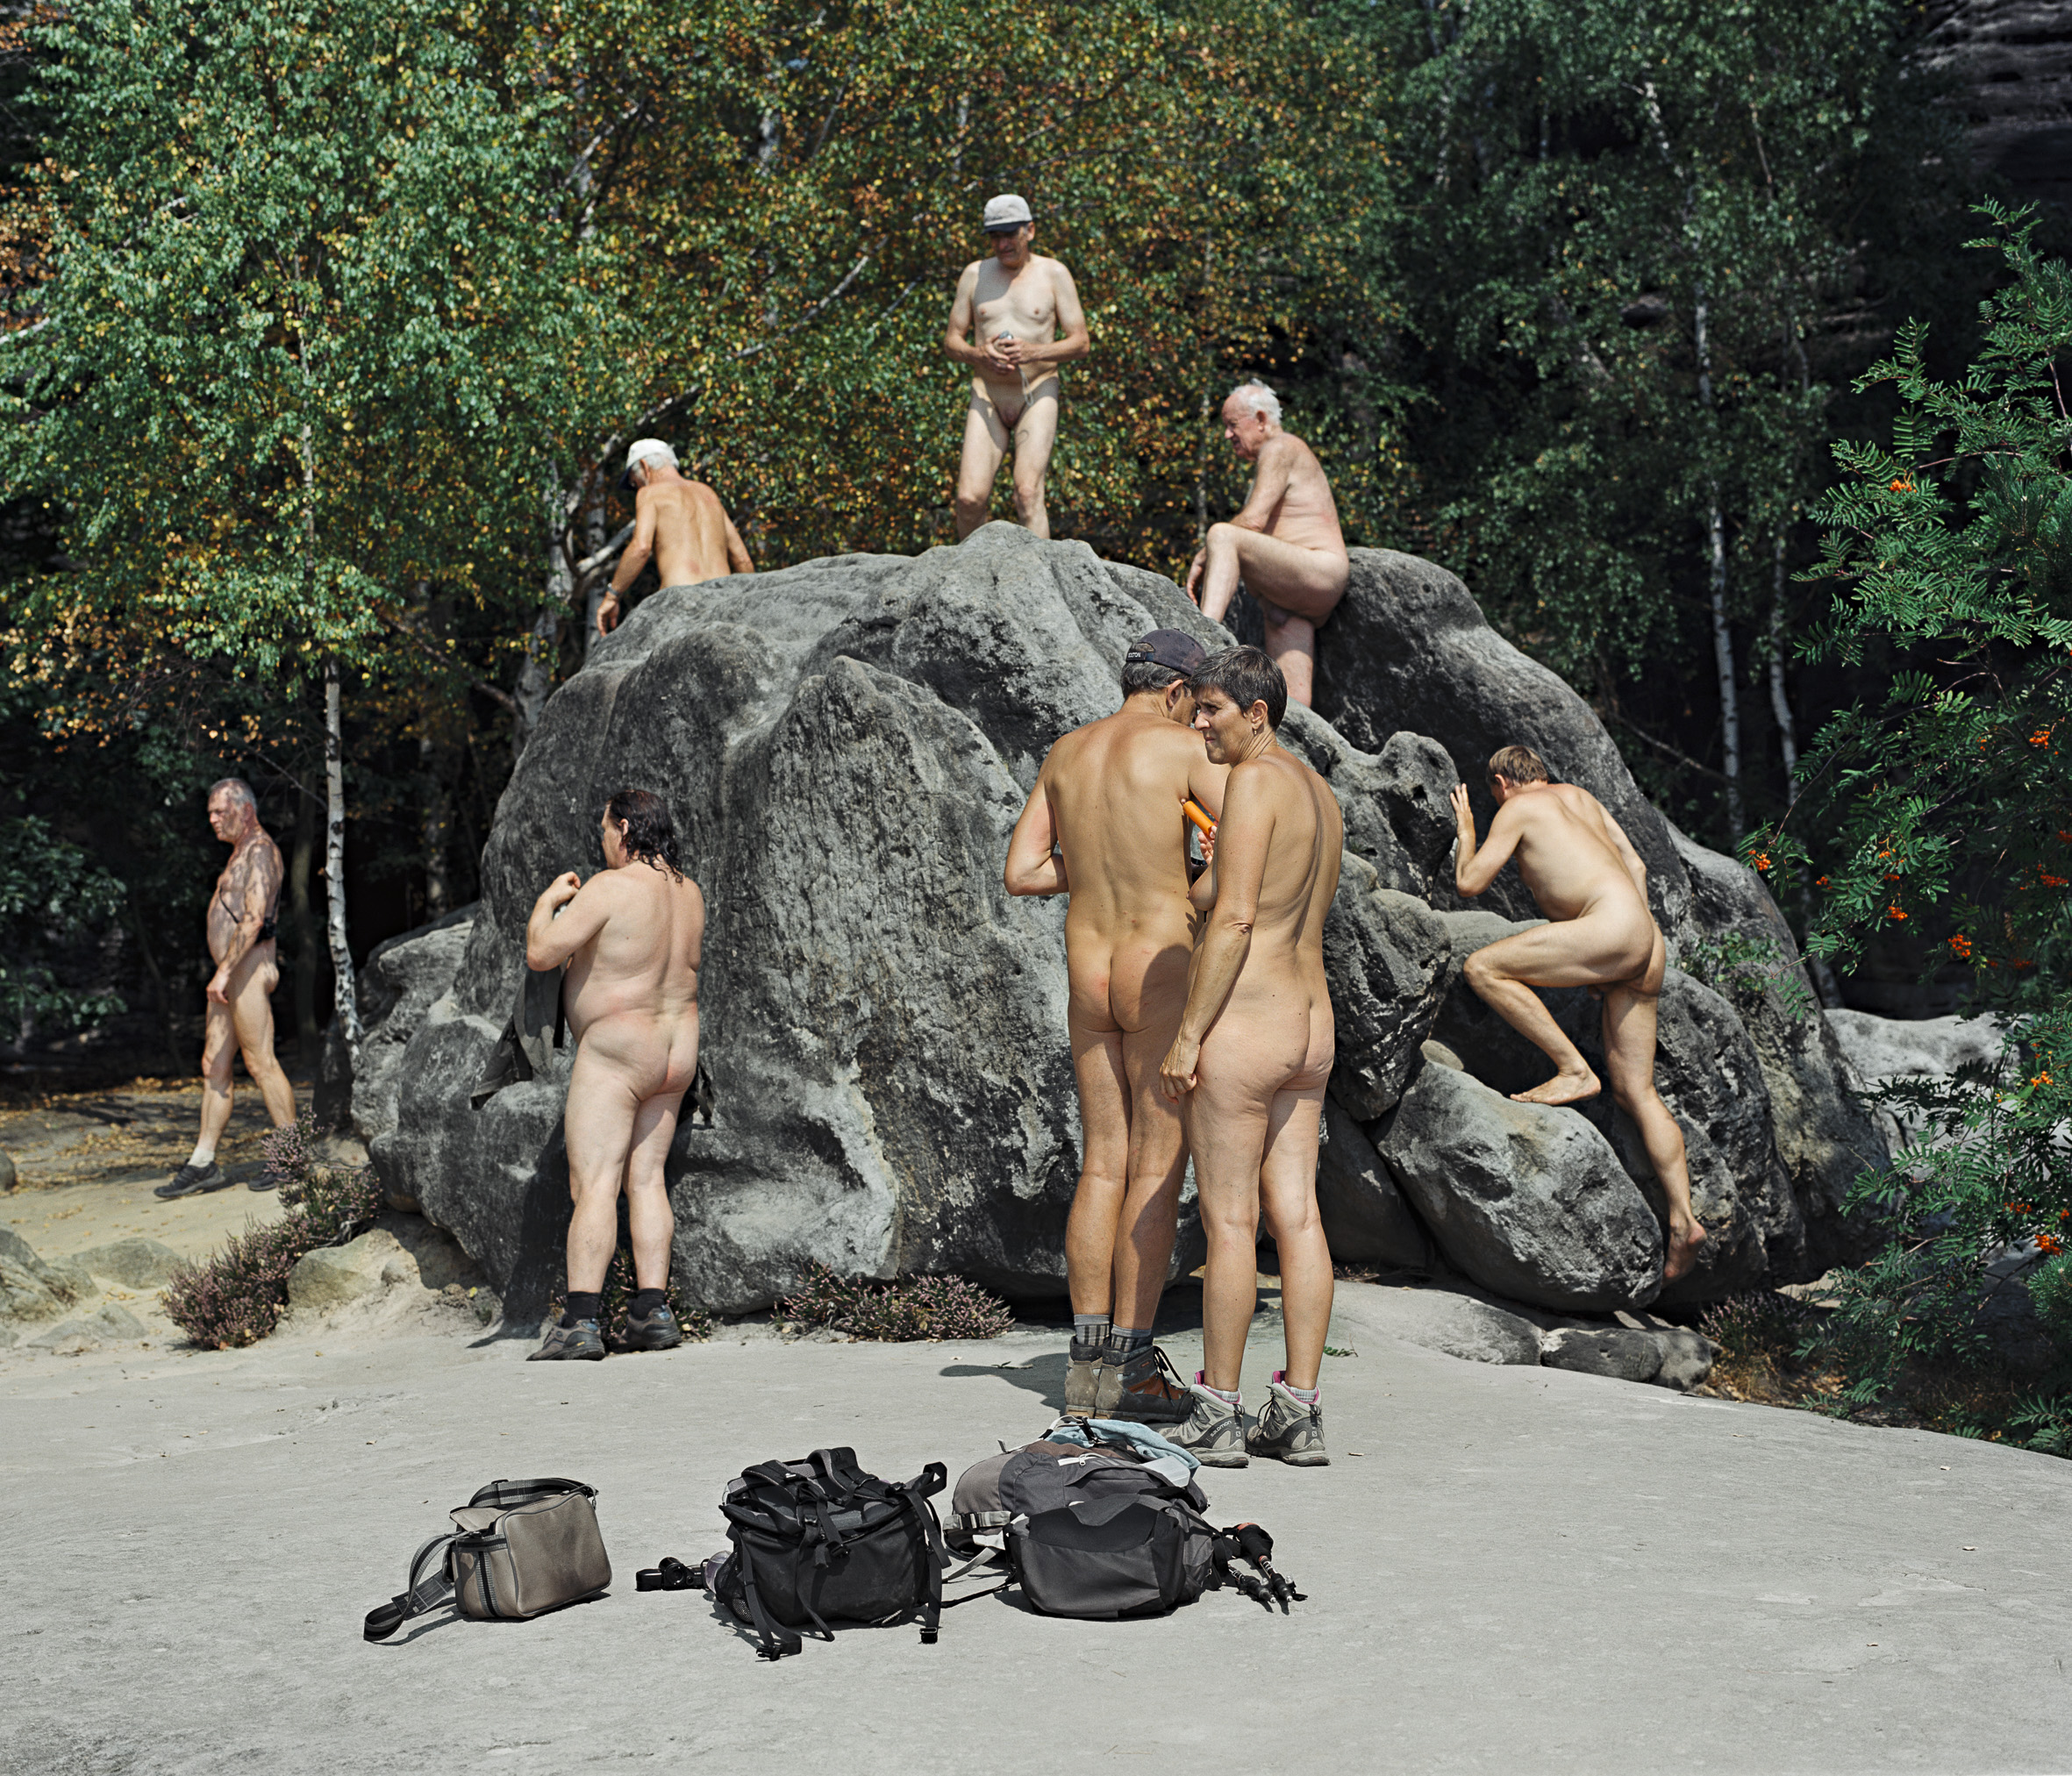 River Deep, Mountain High: Photos of Nudists Trekking in the Alps.